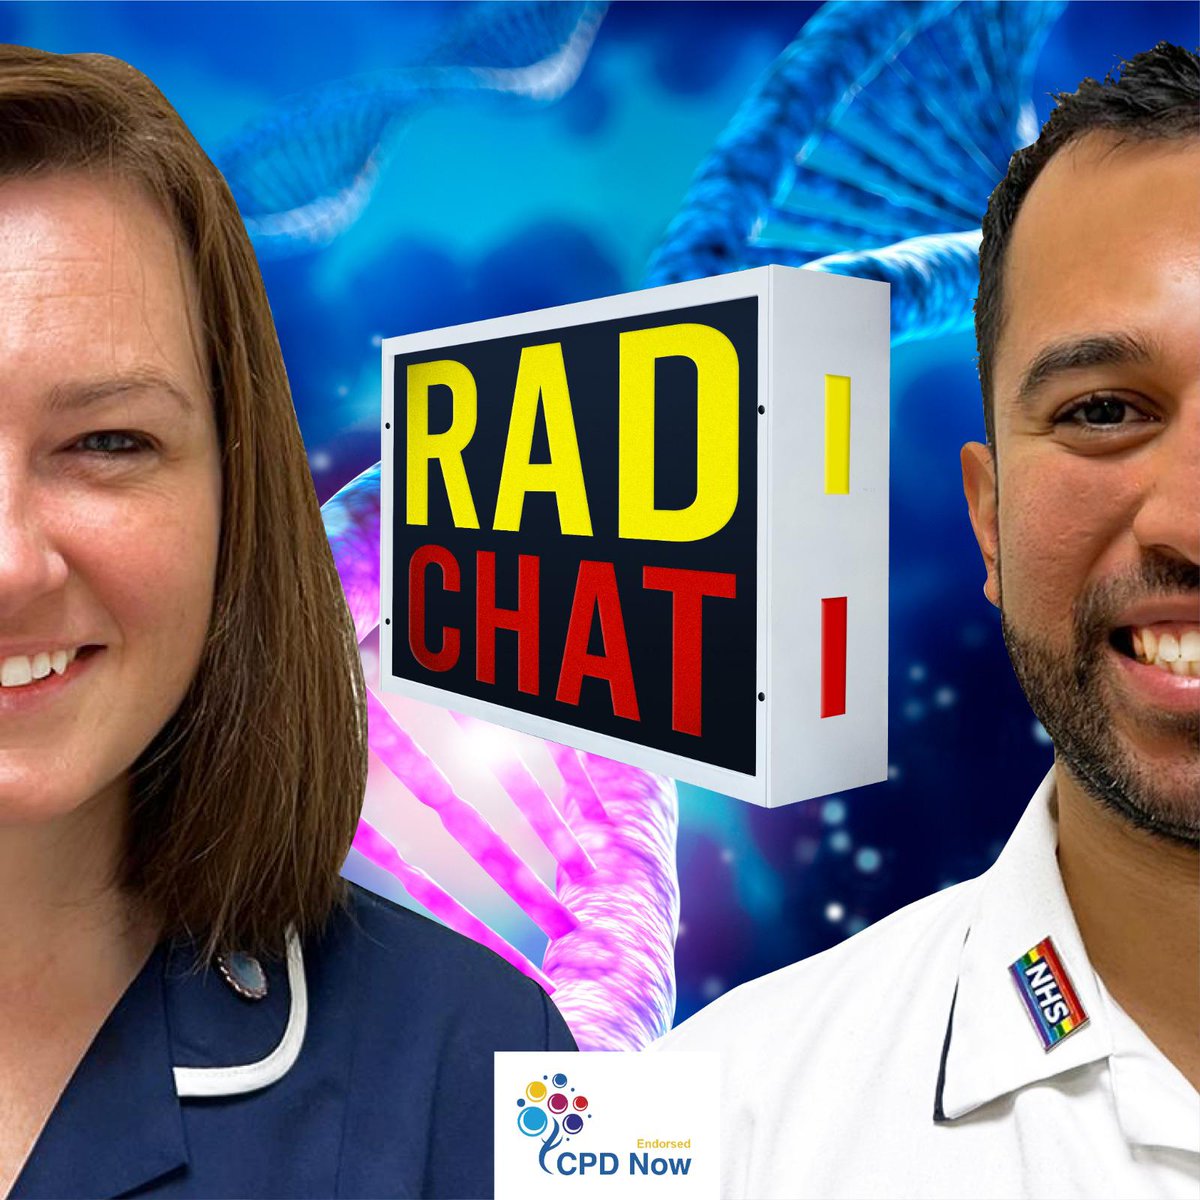 @radiotherapy_uk and @rad_chat will be joining forces for this year’s #Miles4Radiotherapy! The award-winning oncology podcast will be the first ever media partner for our popular annual summer fundraiser. Registration opens Wednesday evening ➡️ bit.ly/3WlPZRv